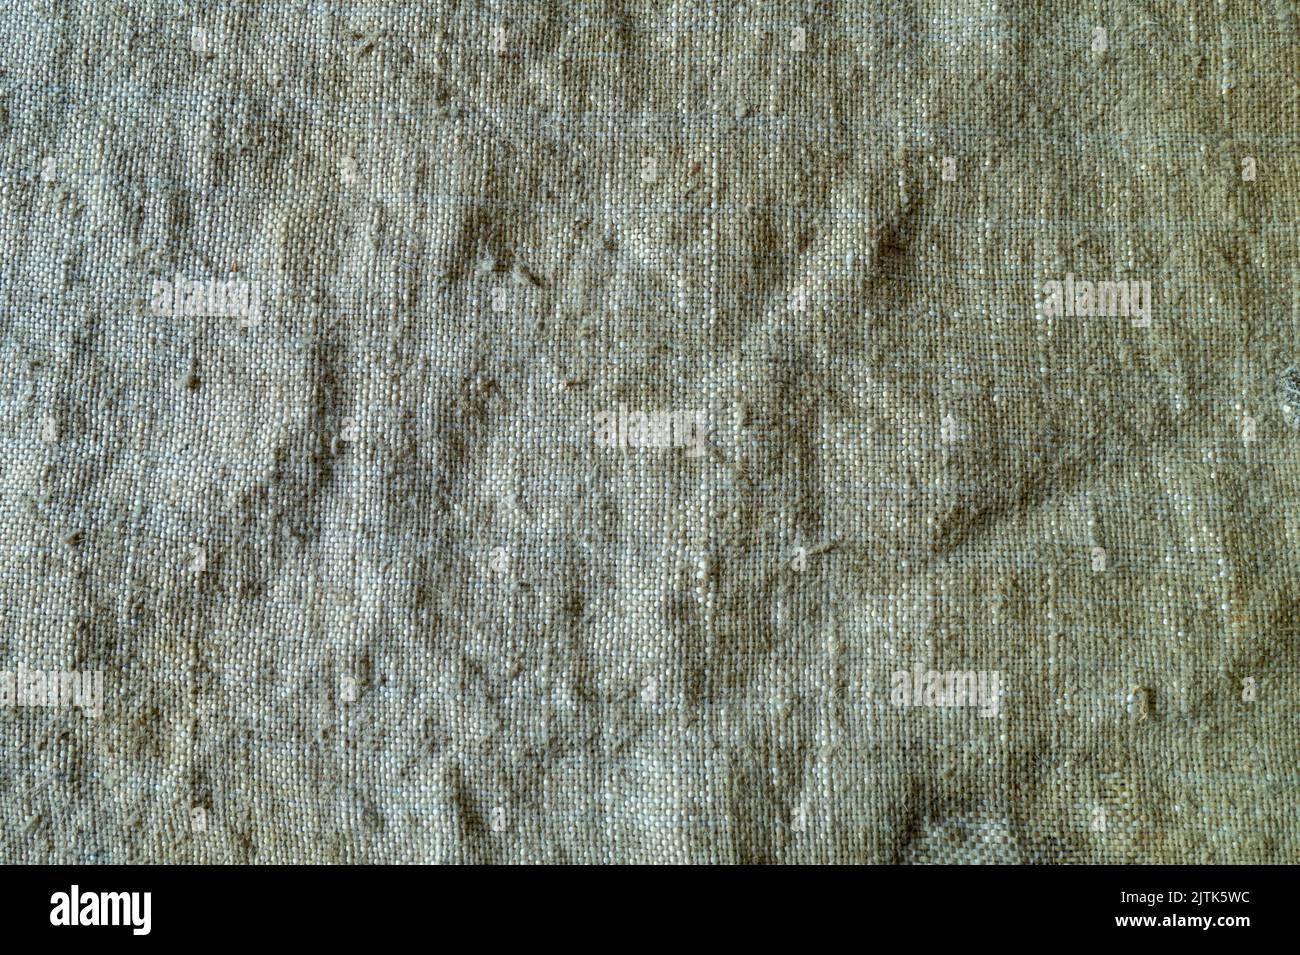 Natural background made of coarse threads. Old bag close-up. Stock Photo